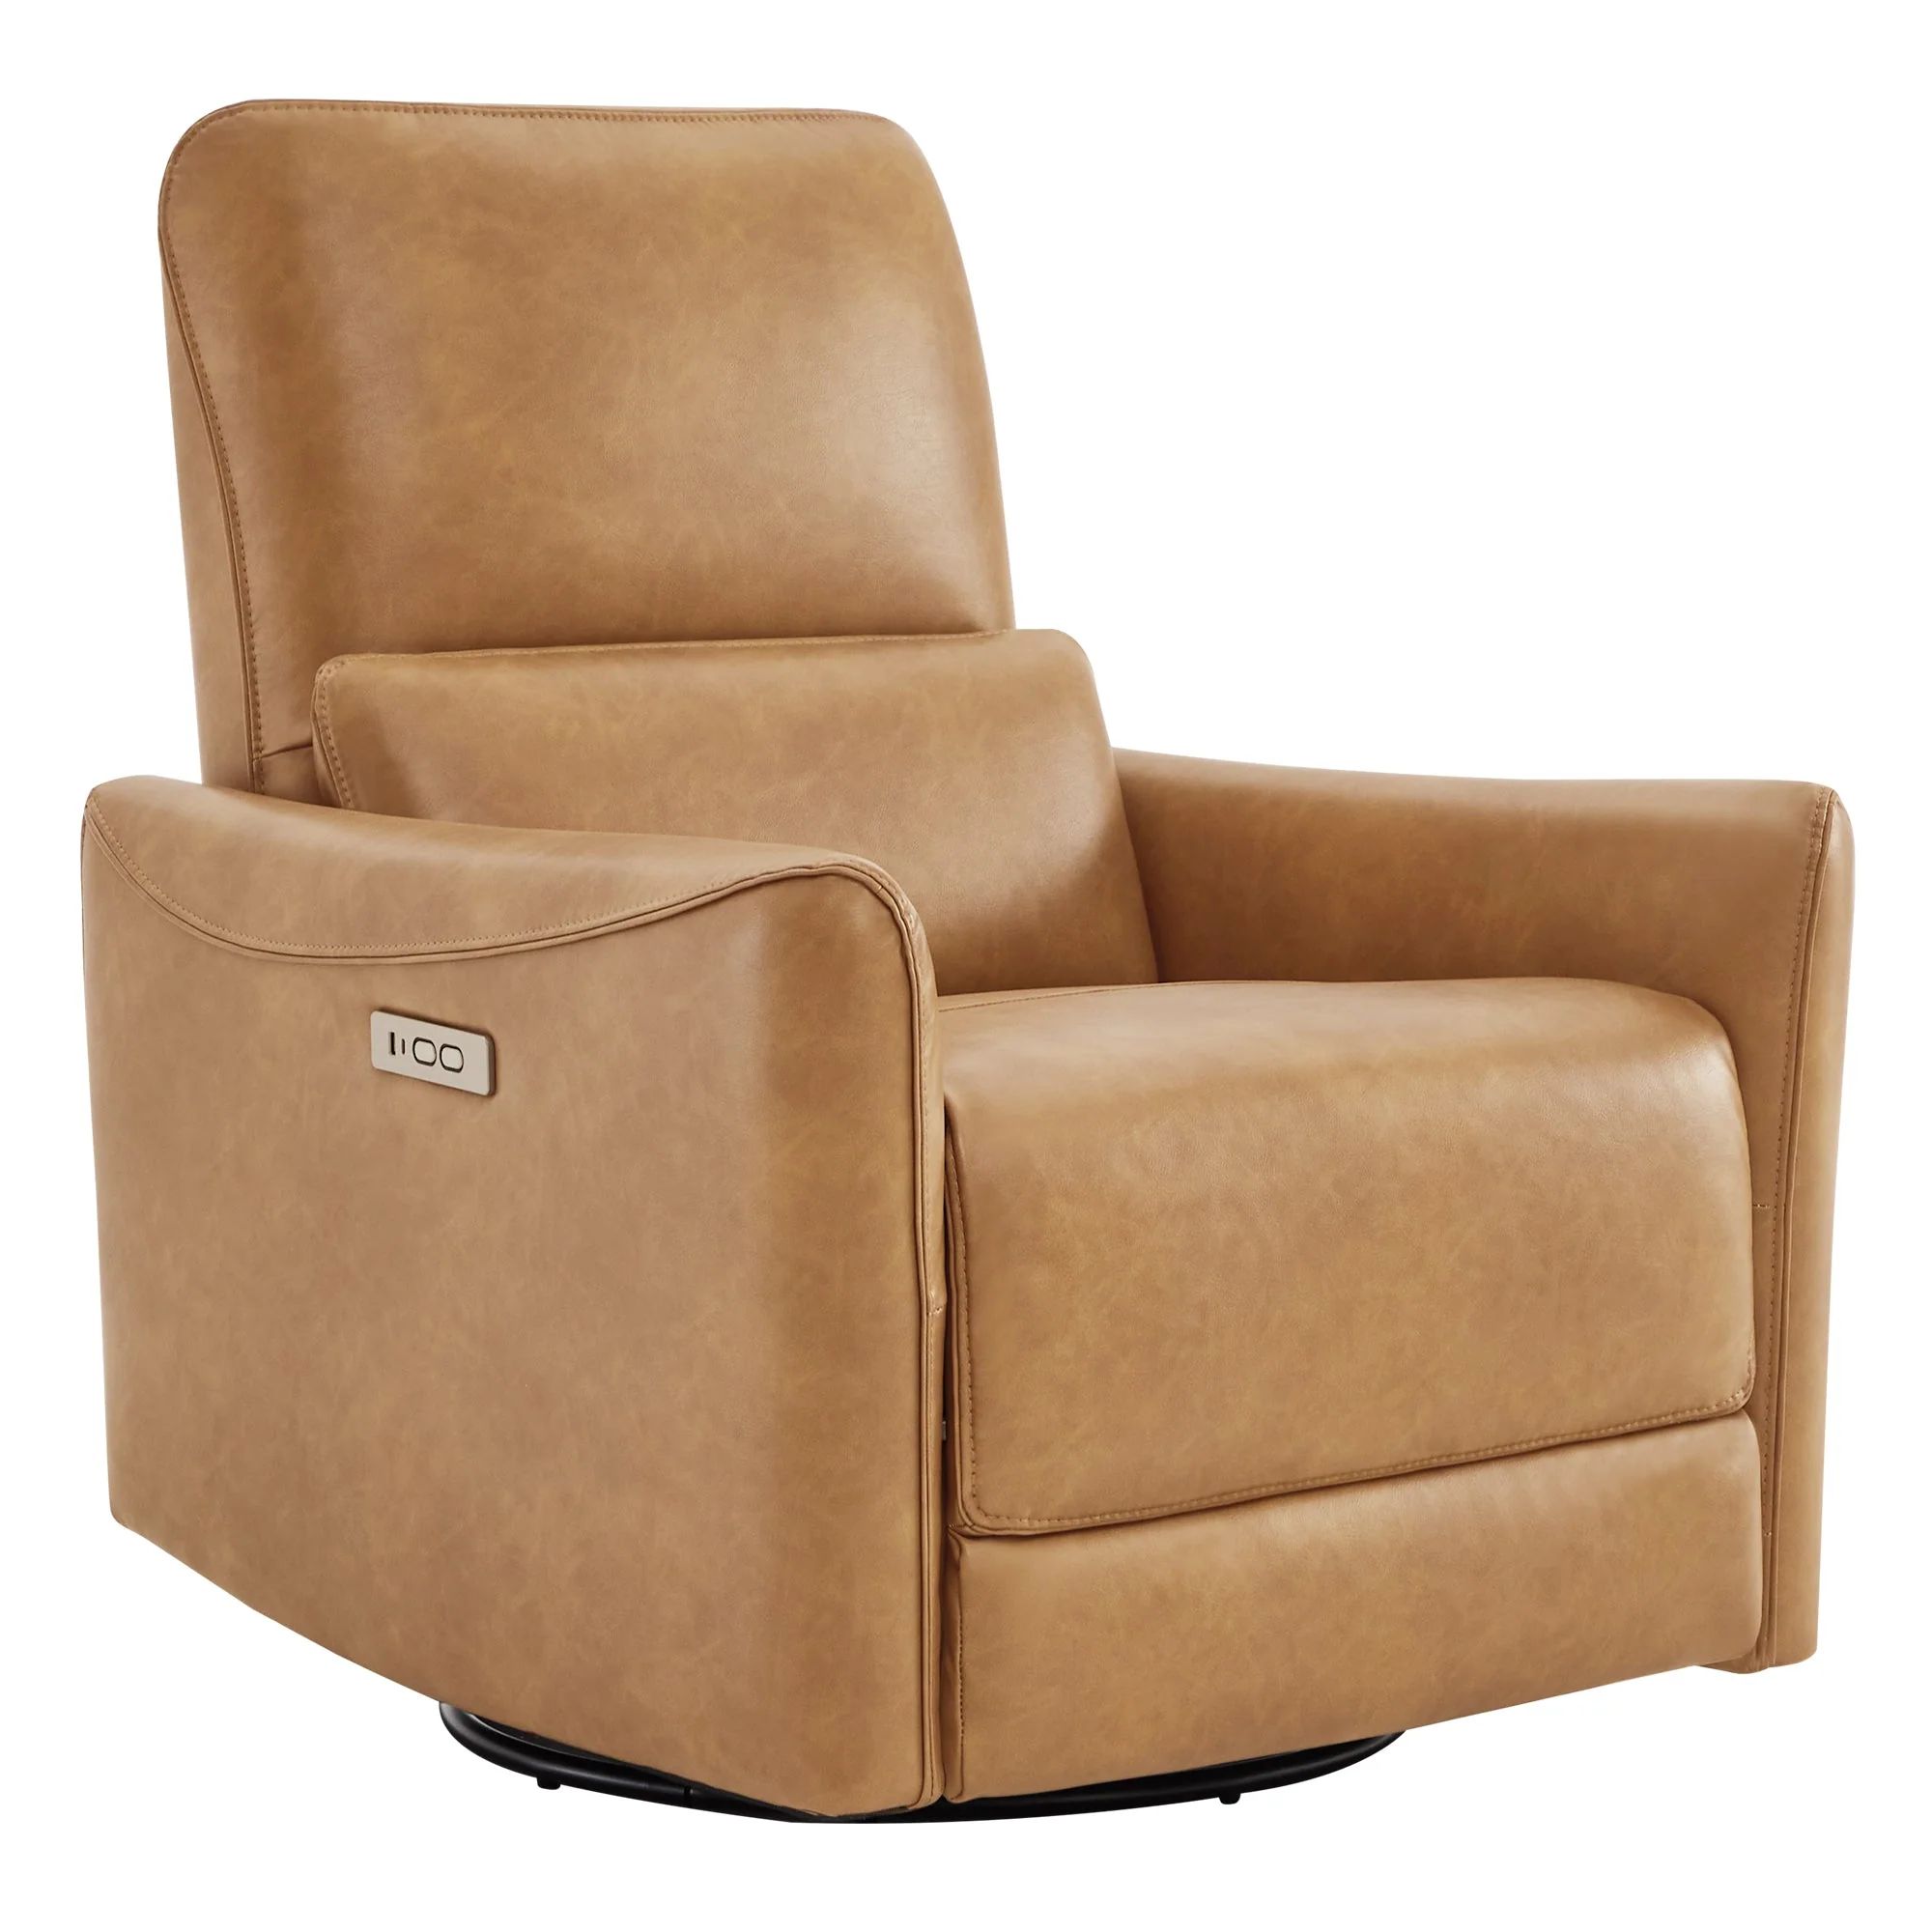 Mid-Century Modern Pushback Brown Leather Recliners | Chita